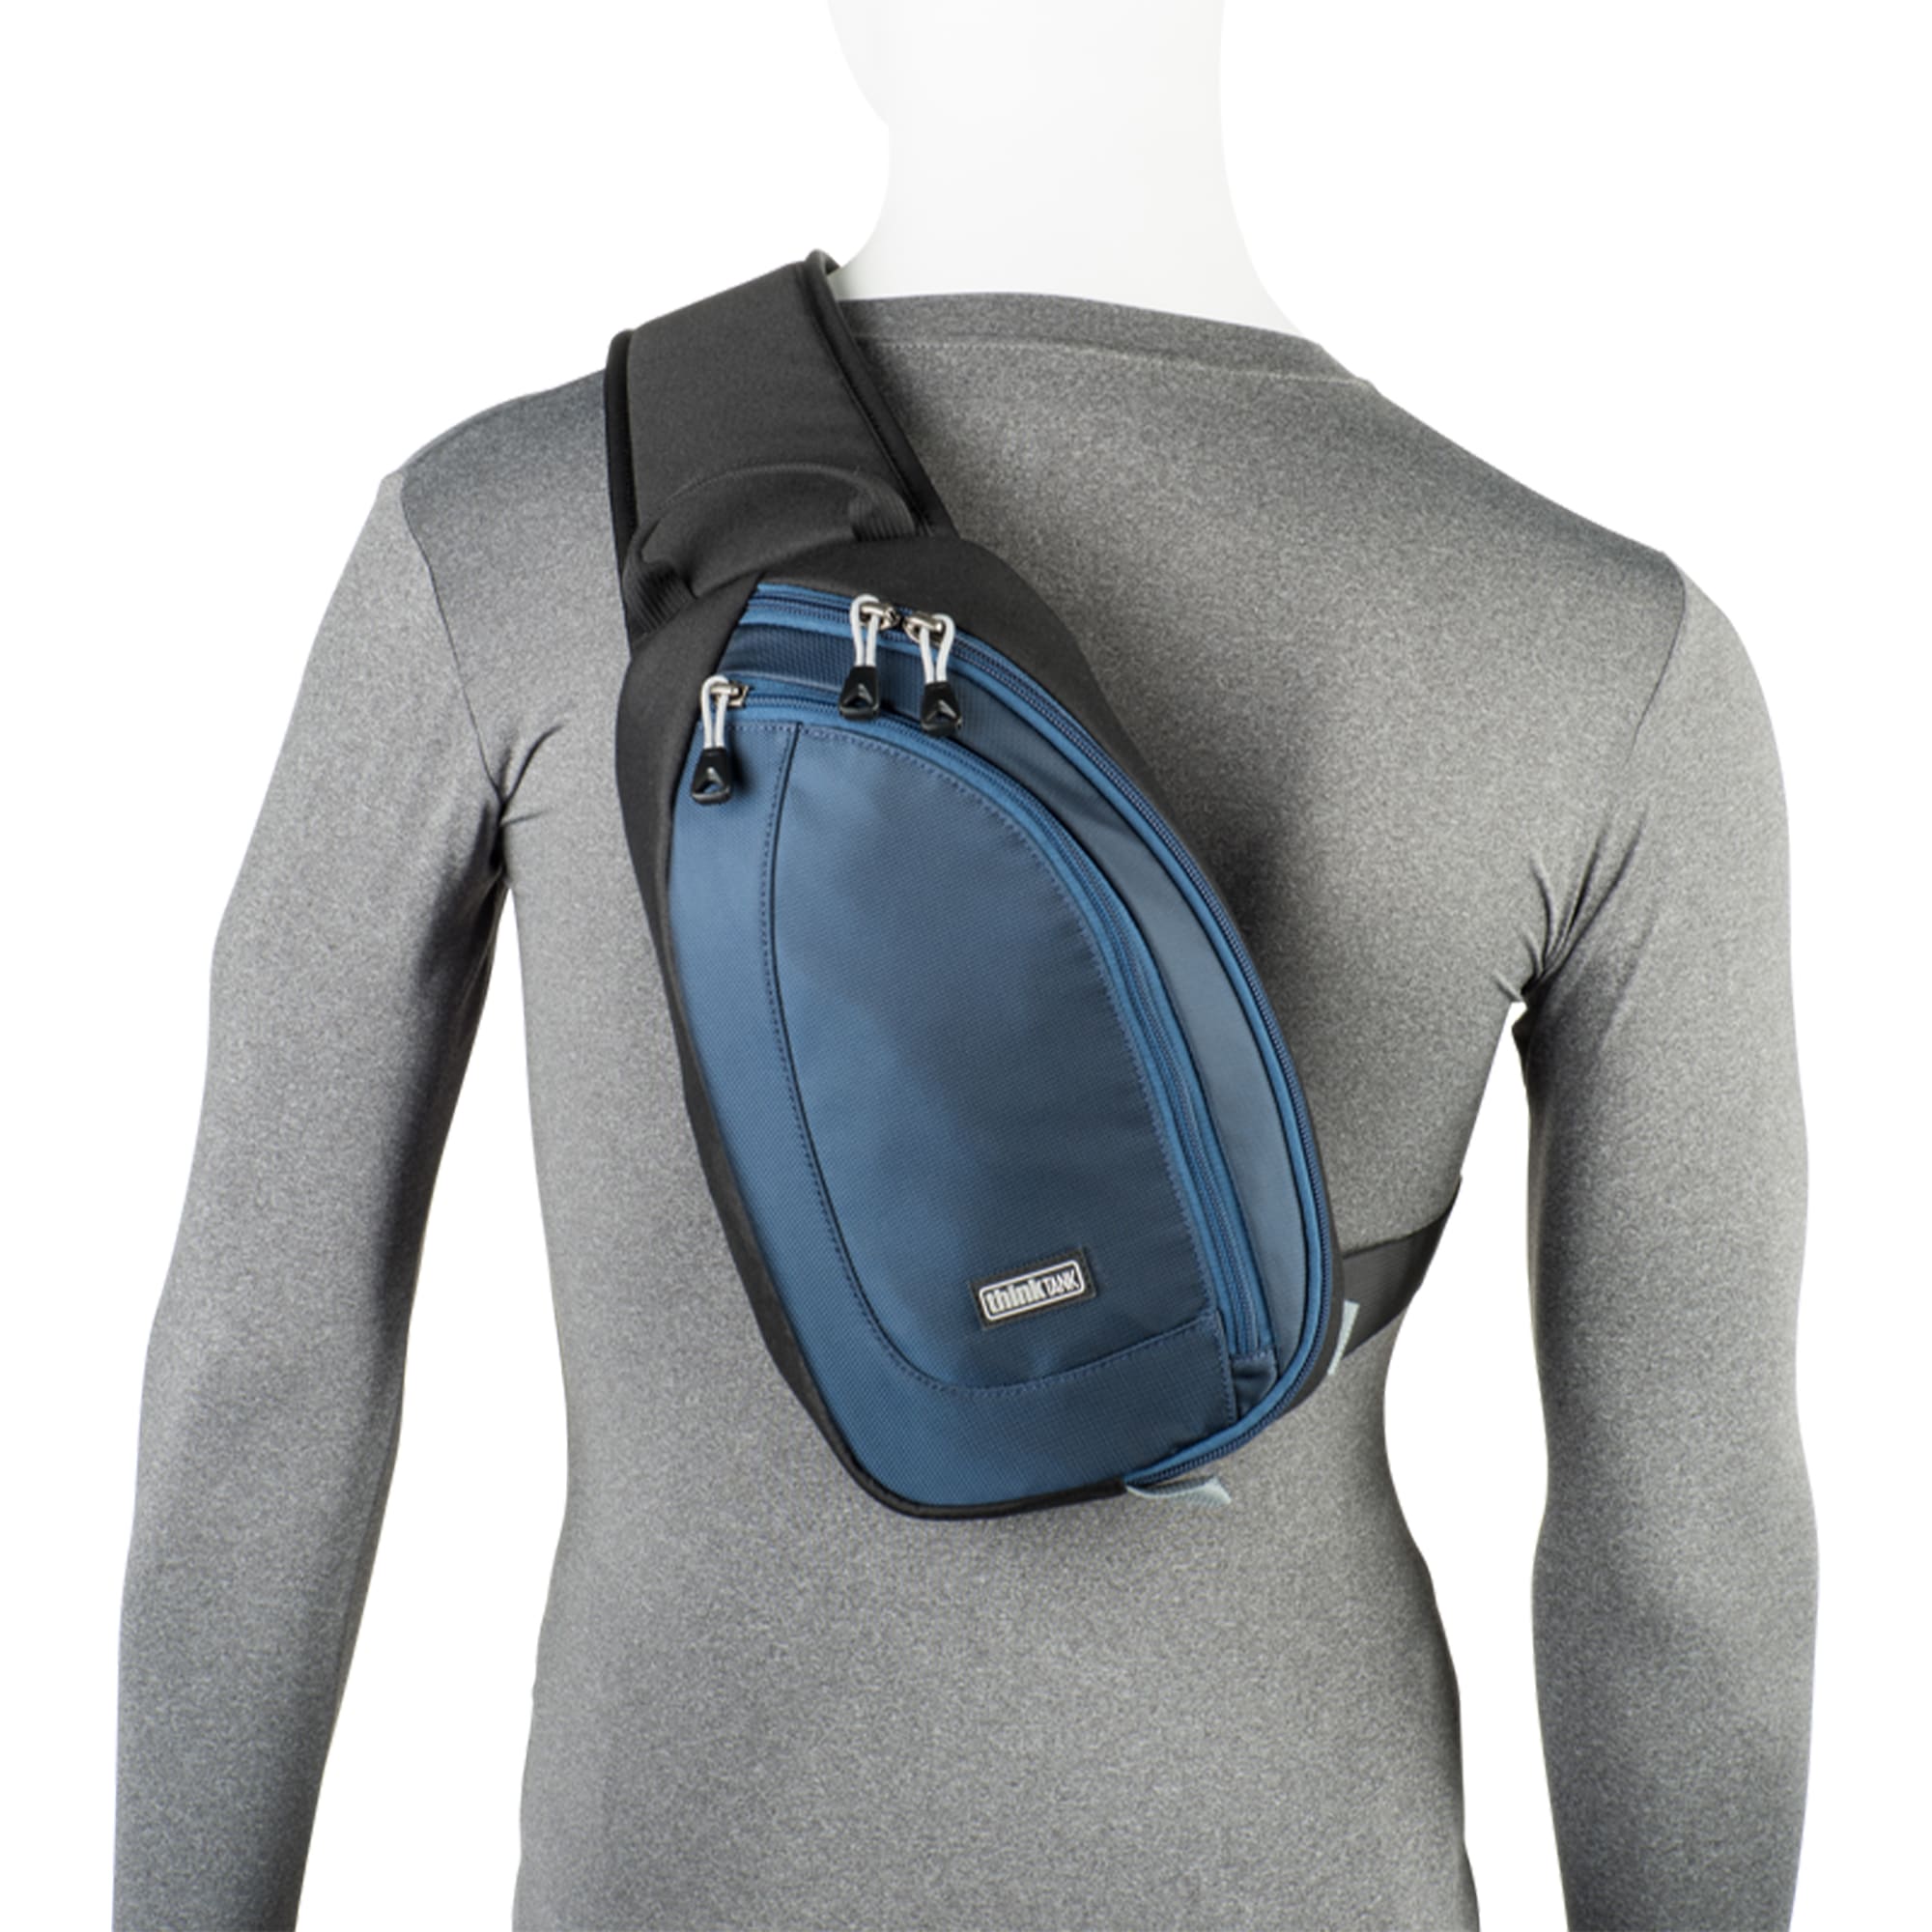 Think Tank TurnStyle 5 V2.0 Charcoal